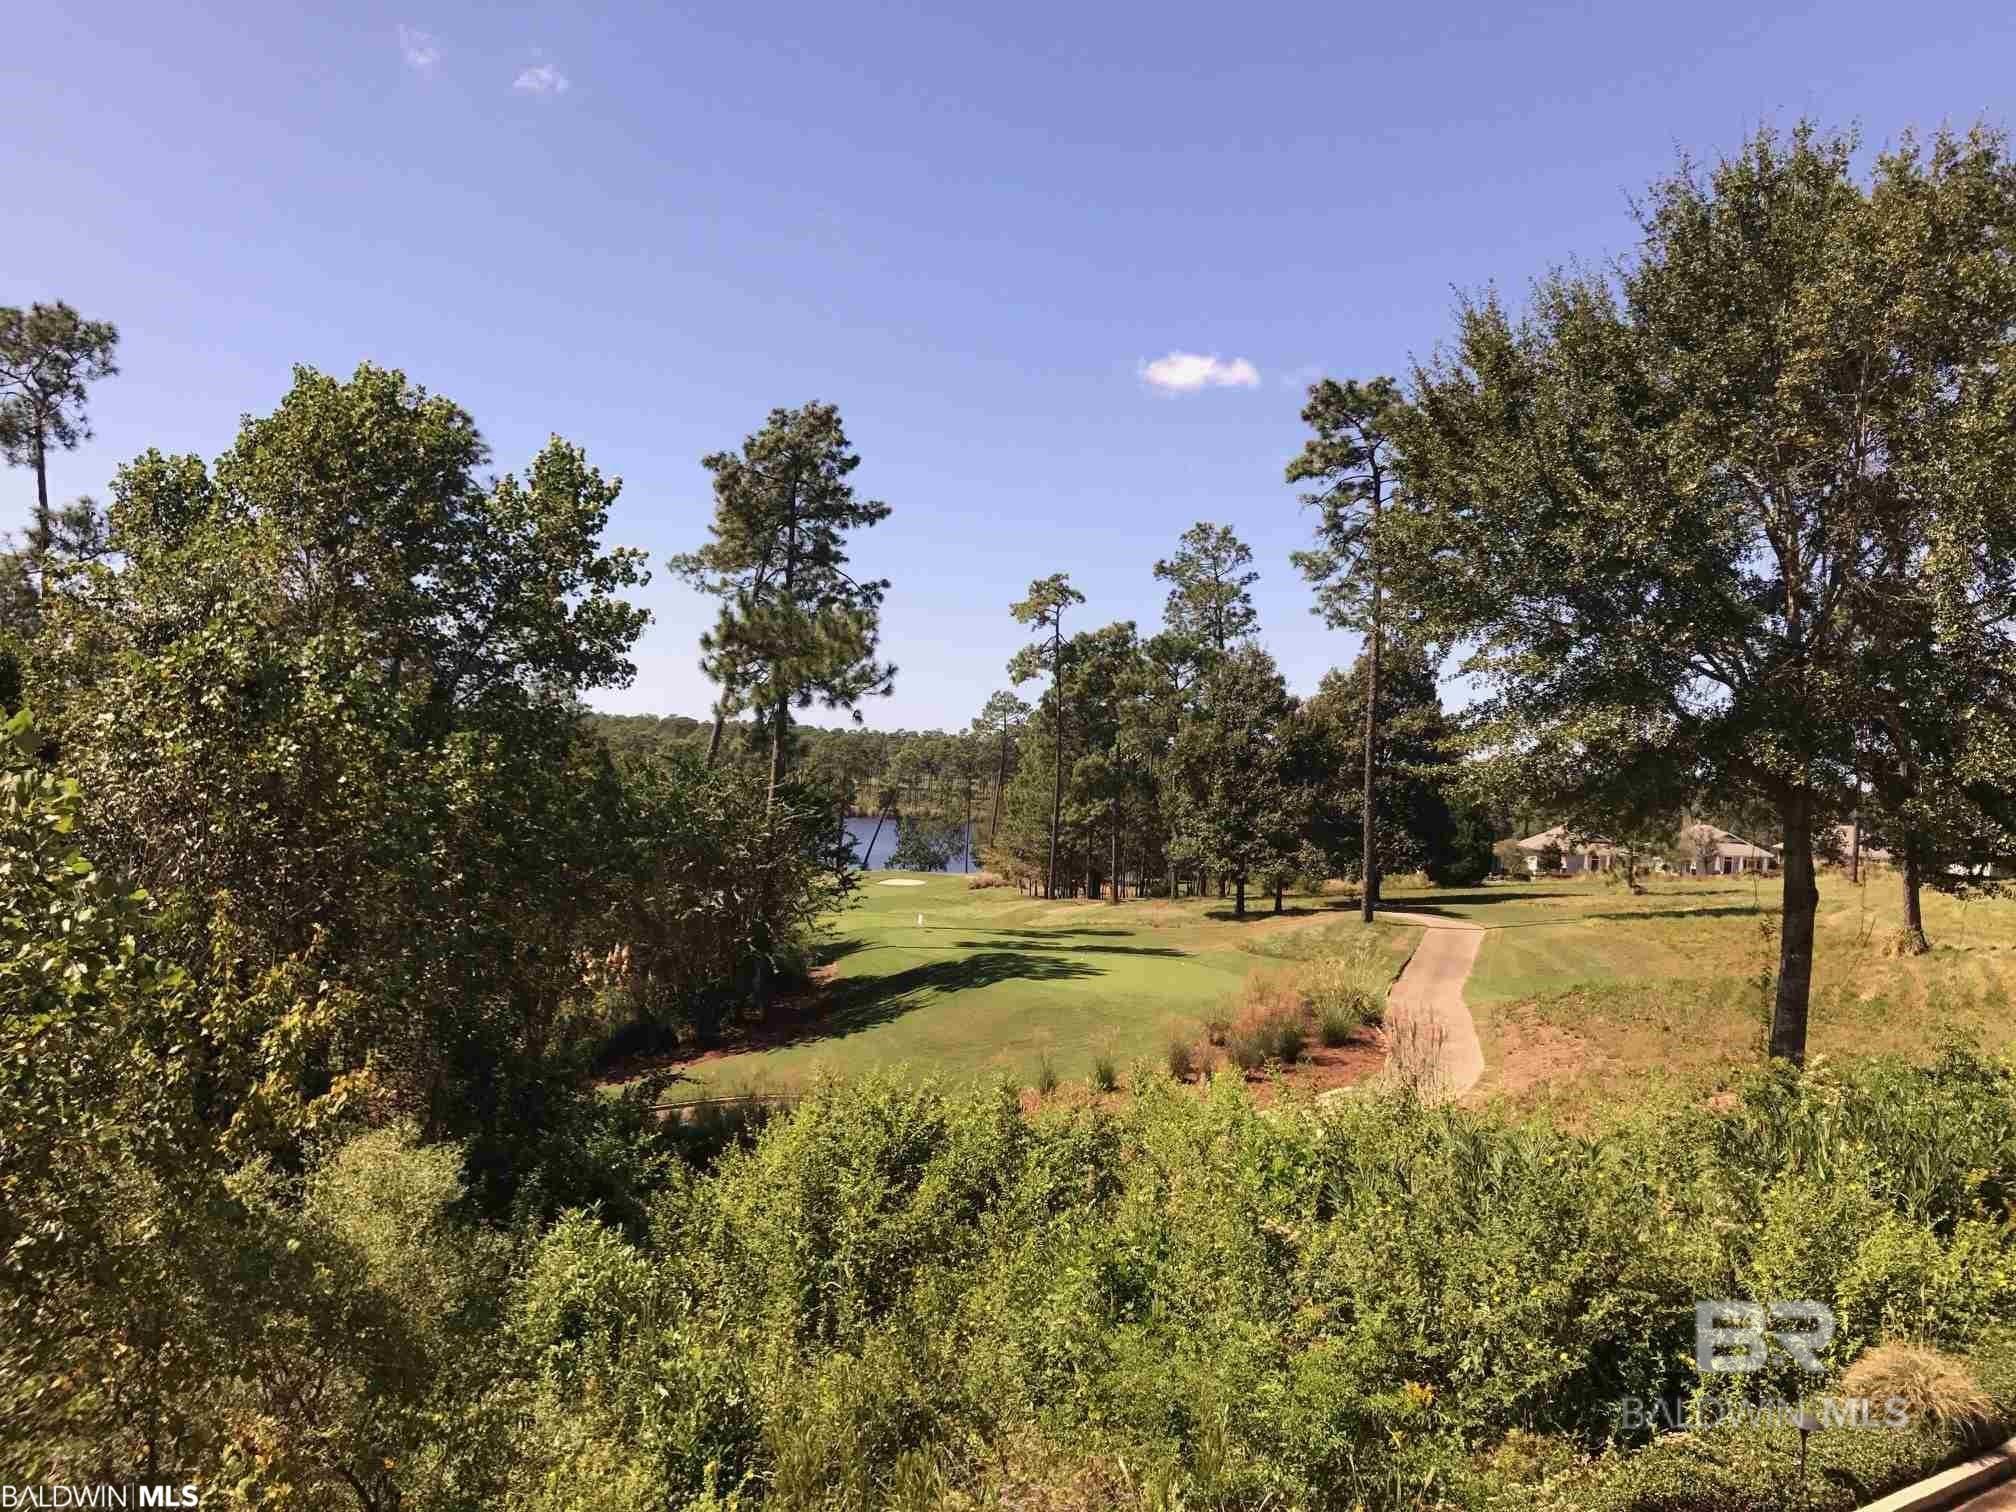 Nestled within the exclusive confines of Steelwood, this picturesque lot offers an unparalleled opportunity to build your dream home overlooking the 16th green and fairway of the renowned Steelwood Golf Course. The gently rolling landscape provides an ideal setting for a residence, affording breathtaking views of the meticulously manicured greens and fairway. As an added bonus, this prime location also provides a captivating vista of the serene Steelwood Lake, enhancing the overall allure of this property. Immerse yourself in the tranquility of nature while enjoying the luxury of a private golf course lifestyle in this captivating and sought-after setting.